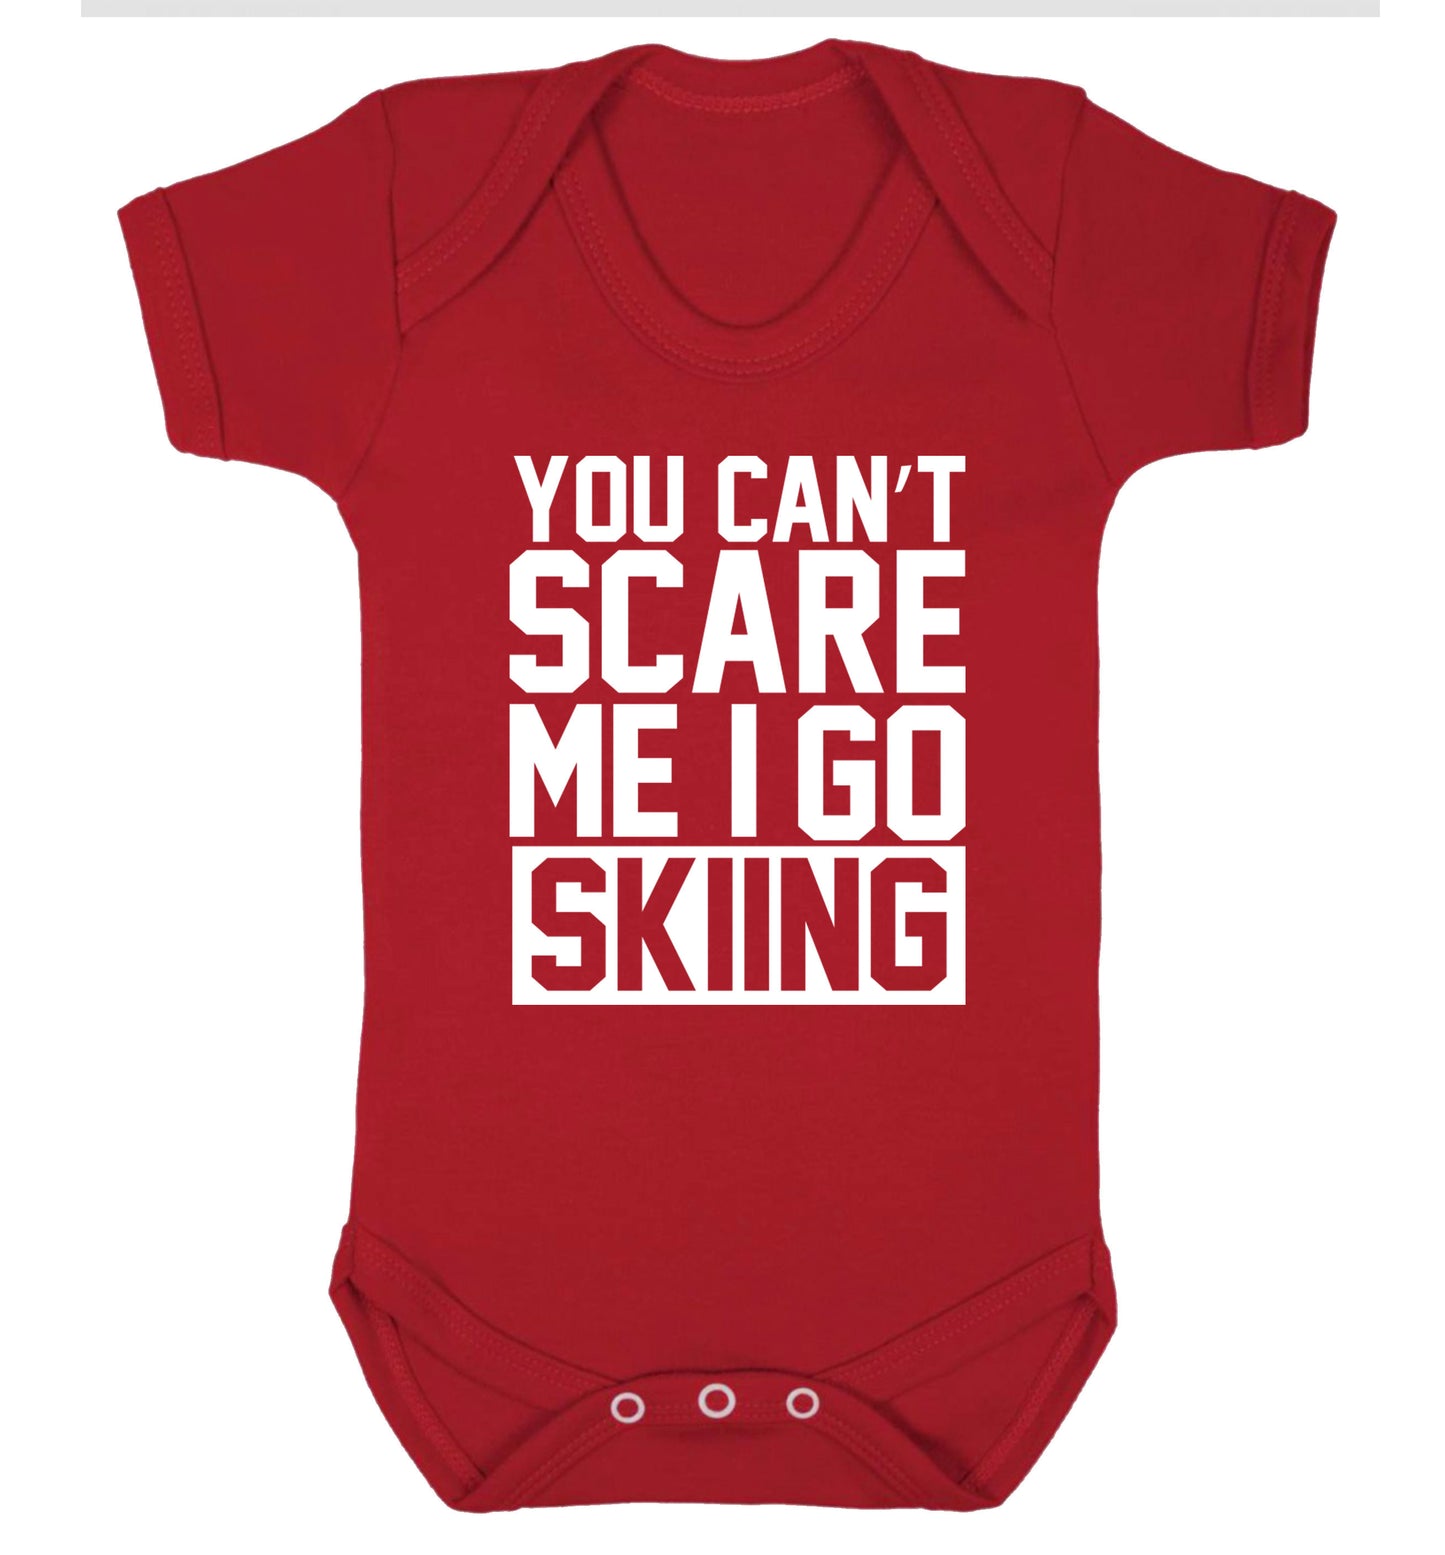 You can't scare me I go skiing Baby Vest red 18-24 months